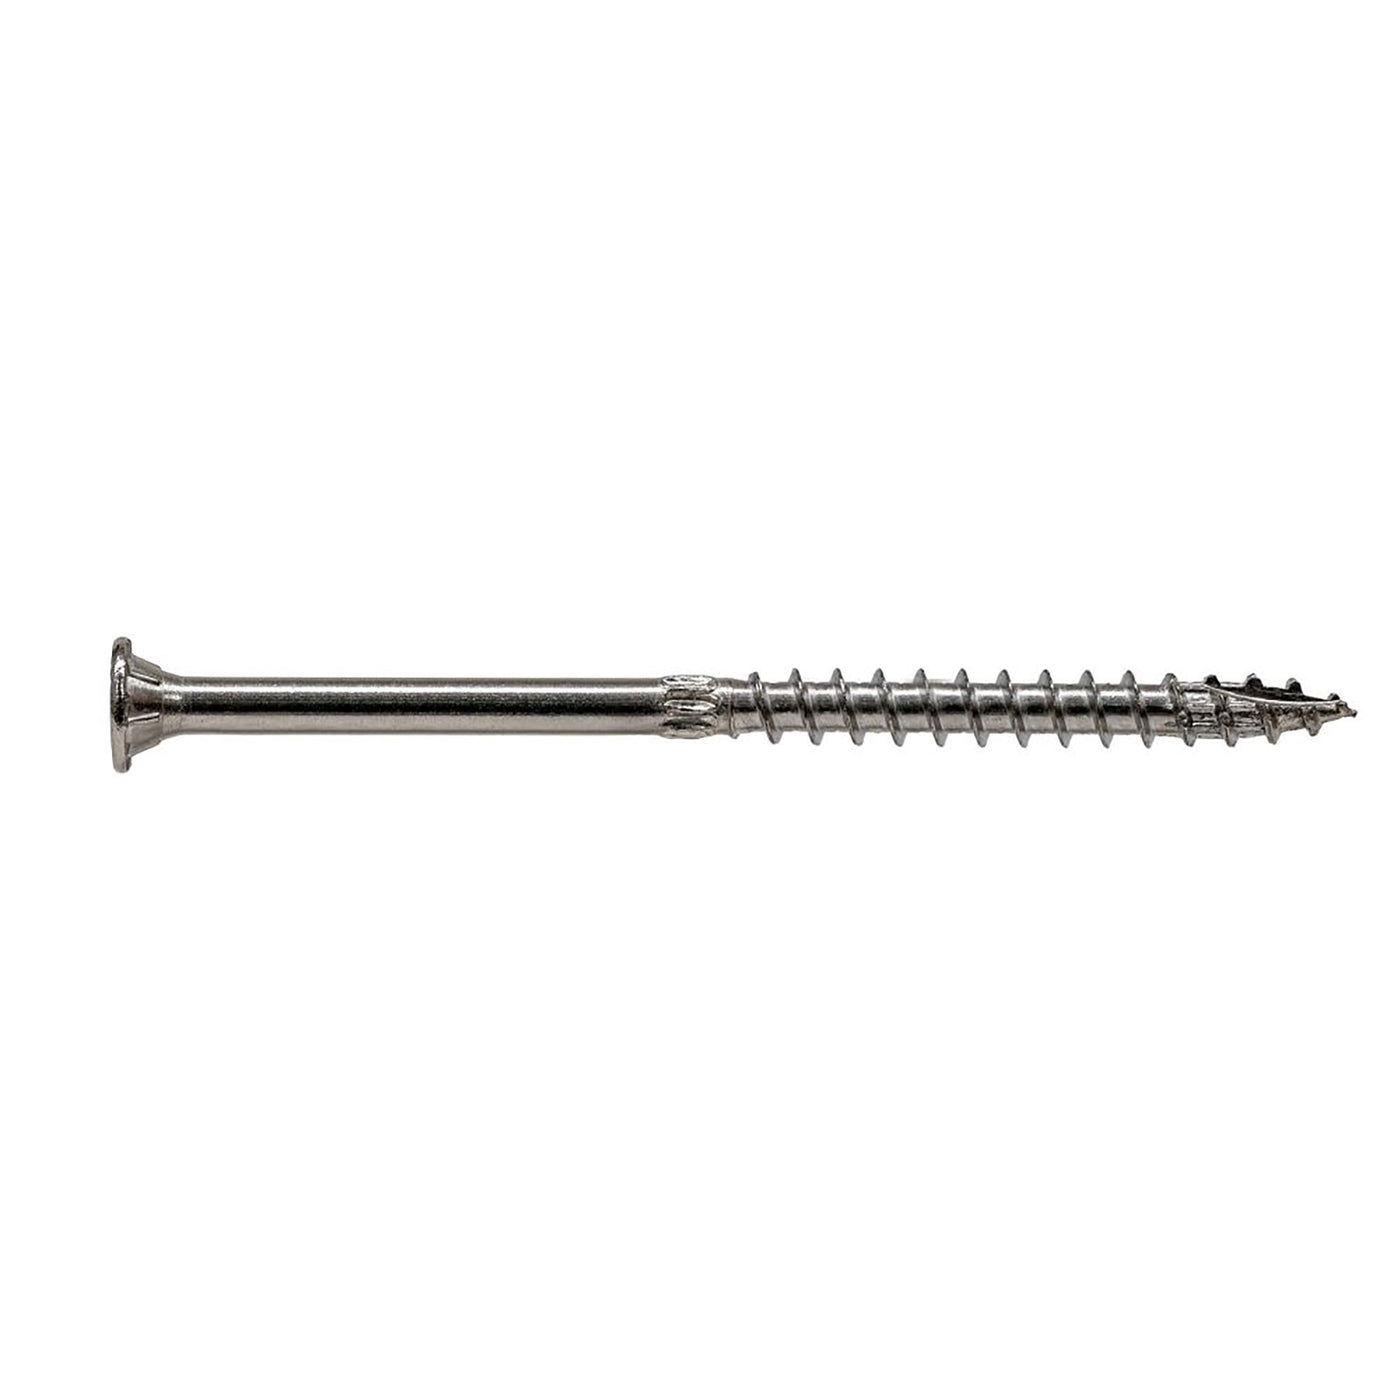 0.276 x 3 Simpson Strong-Drive® SDWS TIMBER SS Screw 316 Stainless Steel (T50 6-Lobe) - Box (10)